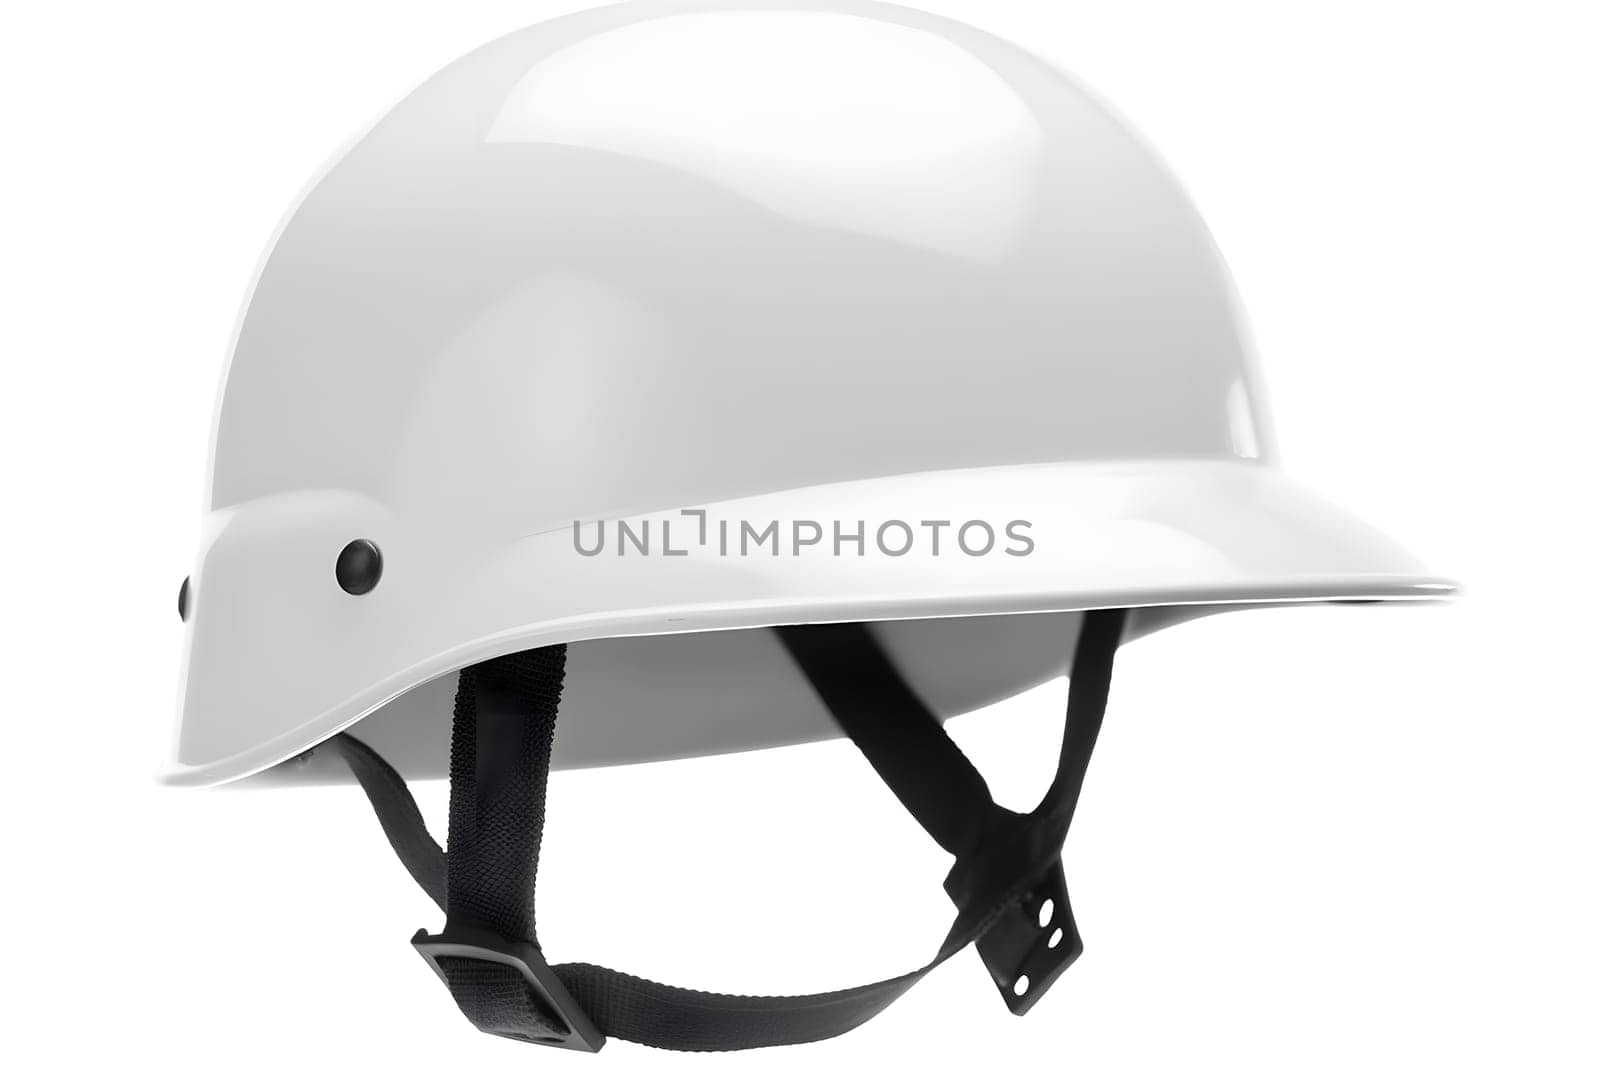 20-th century white combat infantry helmet on white background, neural network generated image by z1b